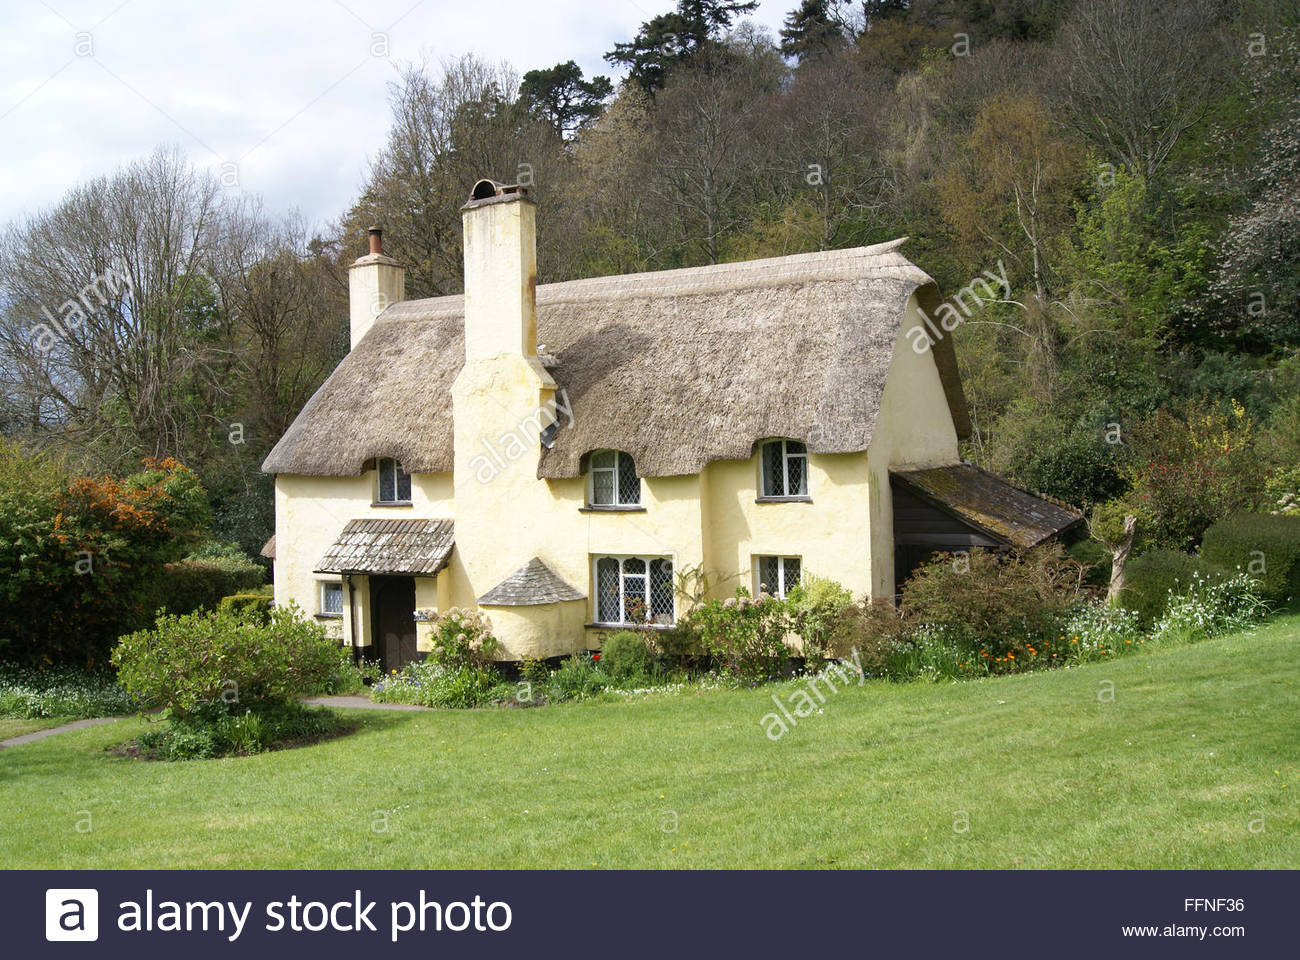 quaint-thatched-cottage-in-the-english-country-side-FFNF36.jpg